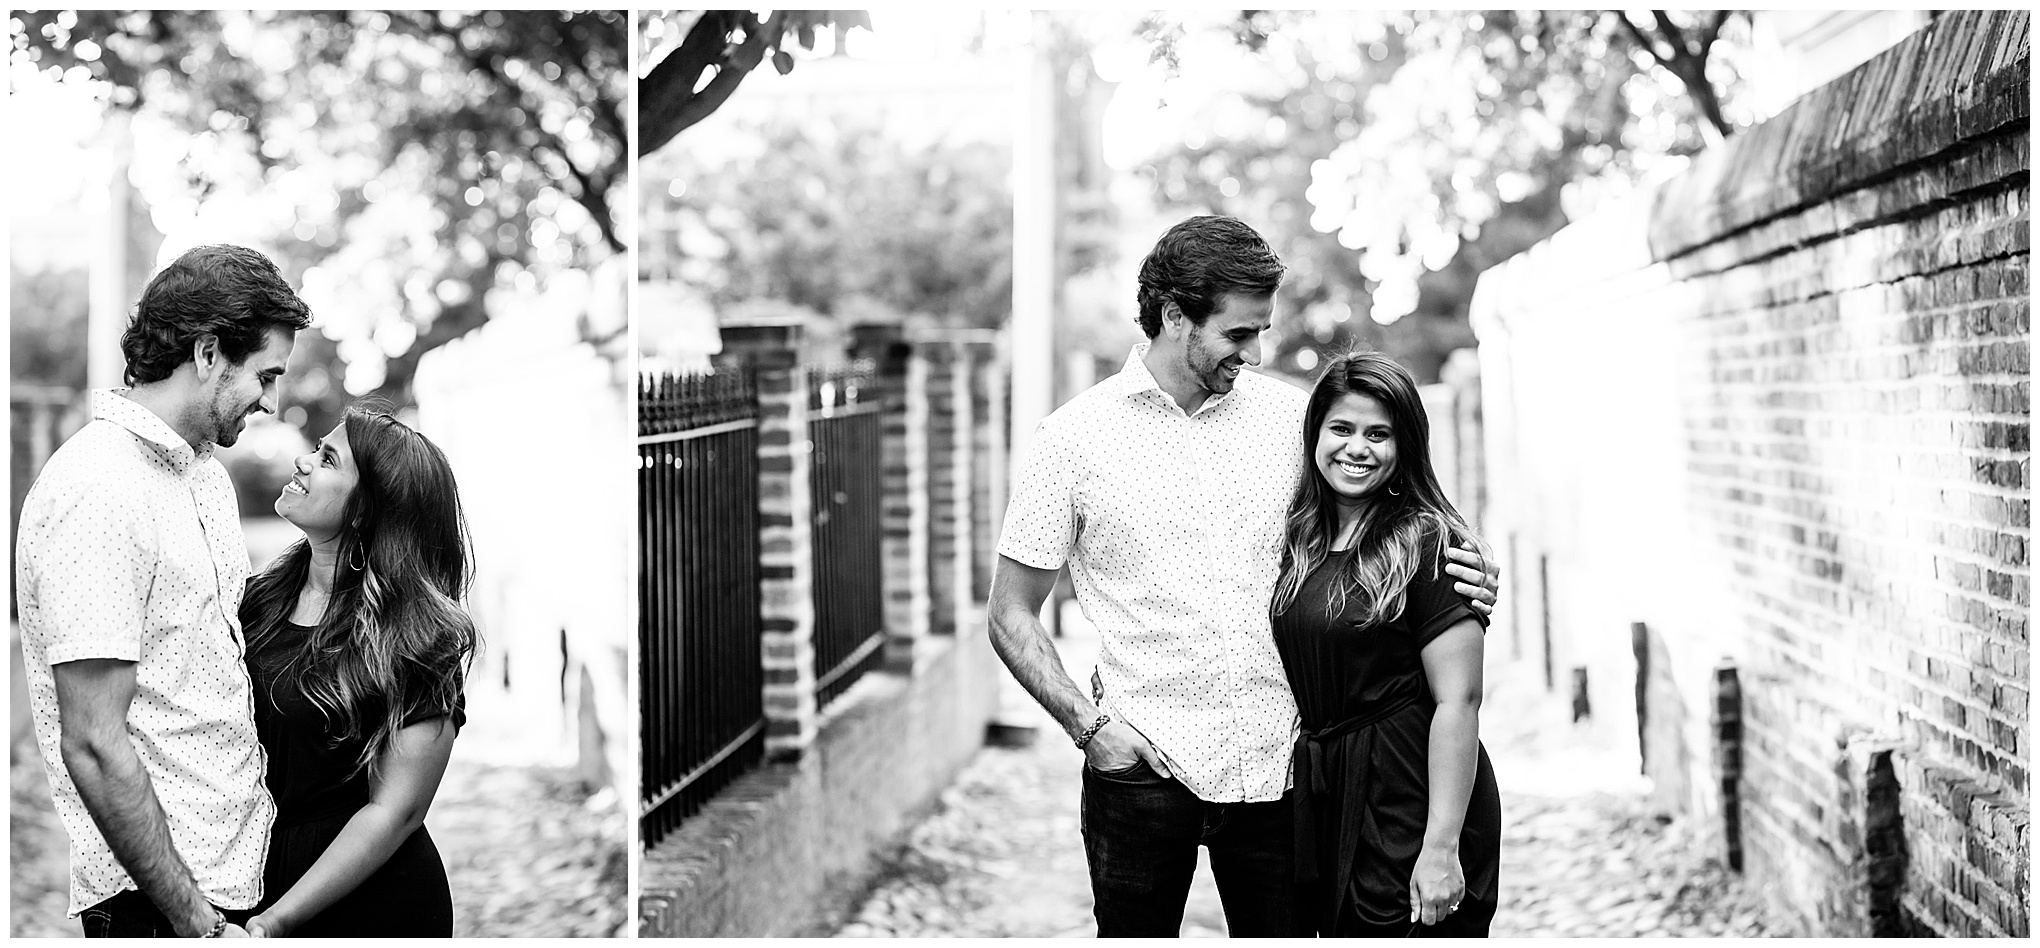 Old Town Alexandria engagement photos, Alexandria engagement photos, Old Town Alexandria photos, Old Town Alexandria, Alexandria engagement photos, Alexandria Virginia, classic engagement photos, historic town engagement photos, engagement photos, Rachel E.H. Photography, black and white engagement photo, Lee Street alley